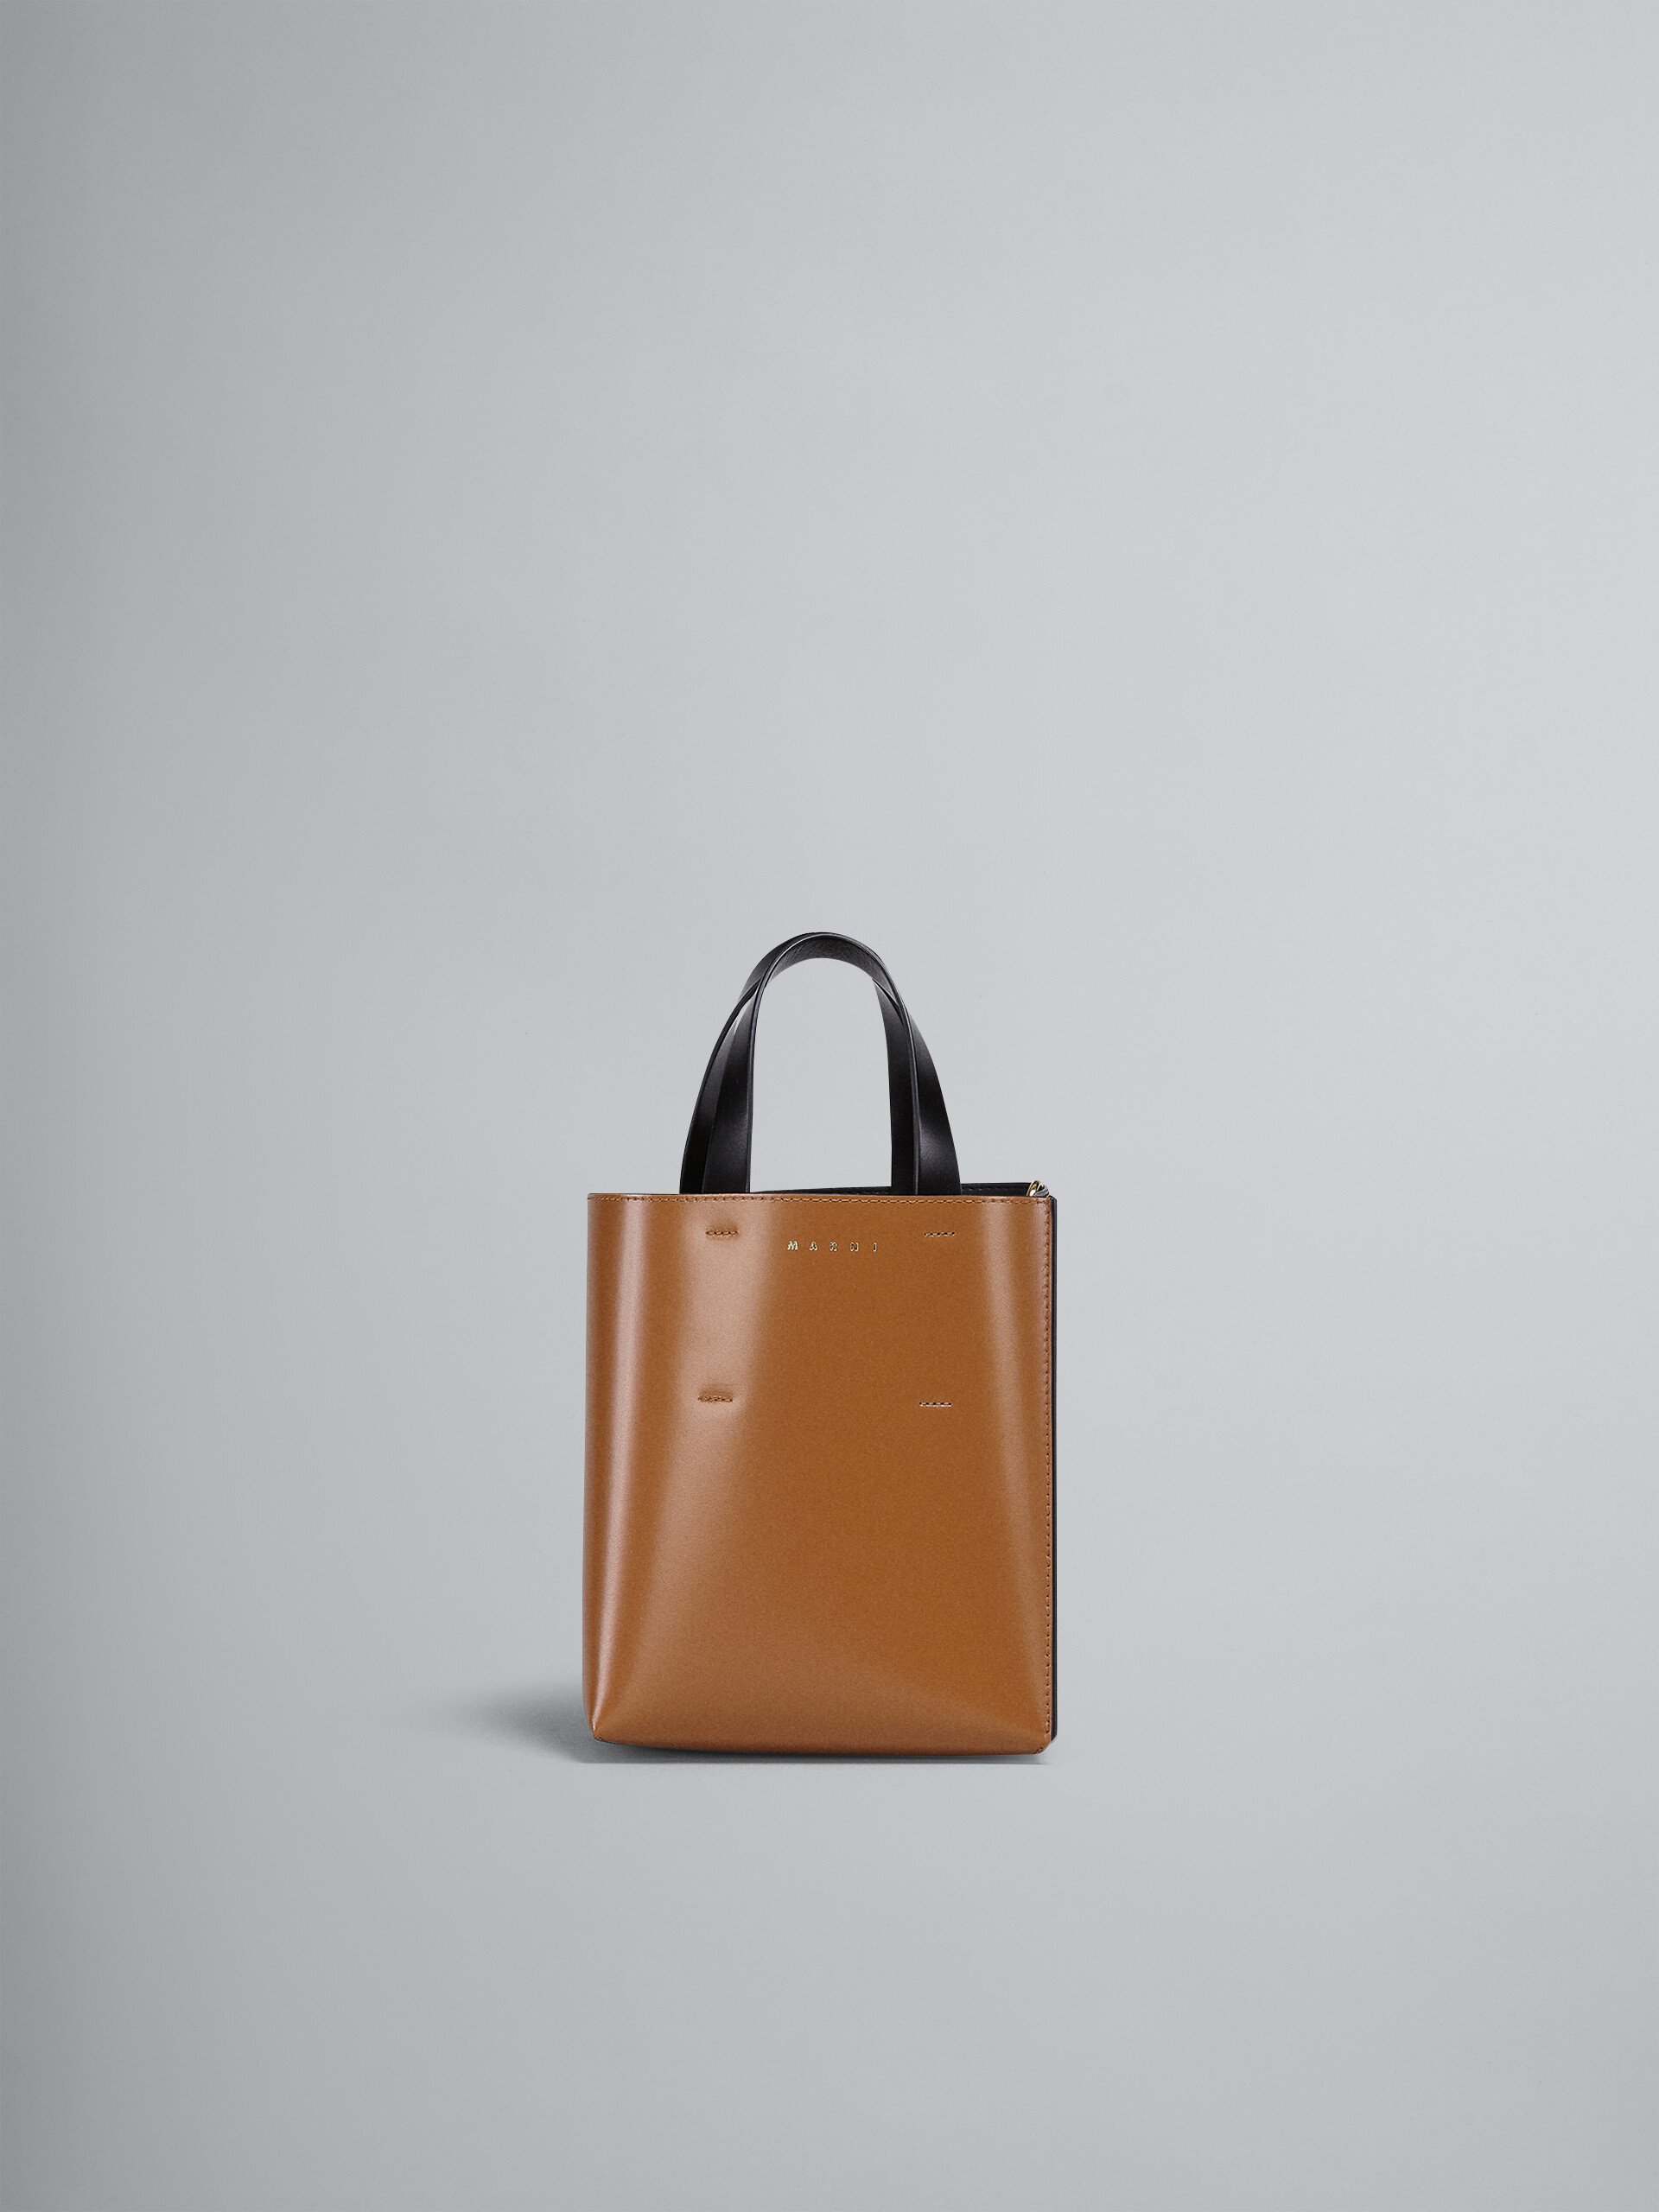 MUSEO mini bag in brown and black leather - Shopping Bags - Image 1